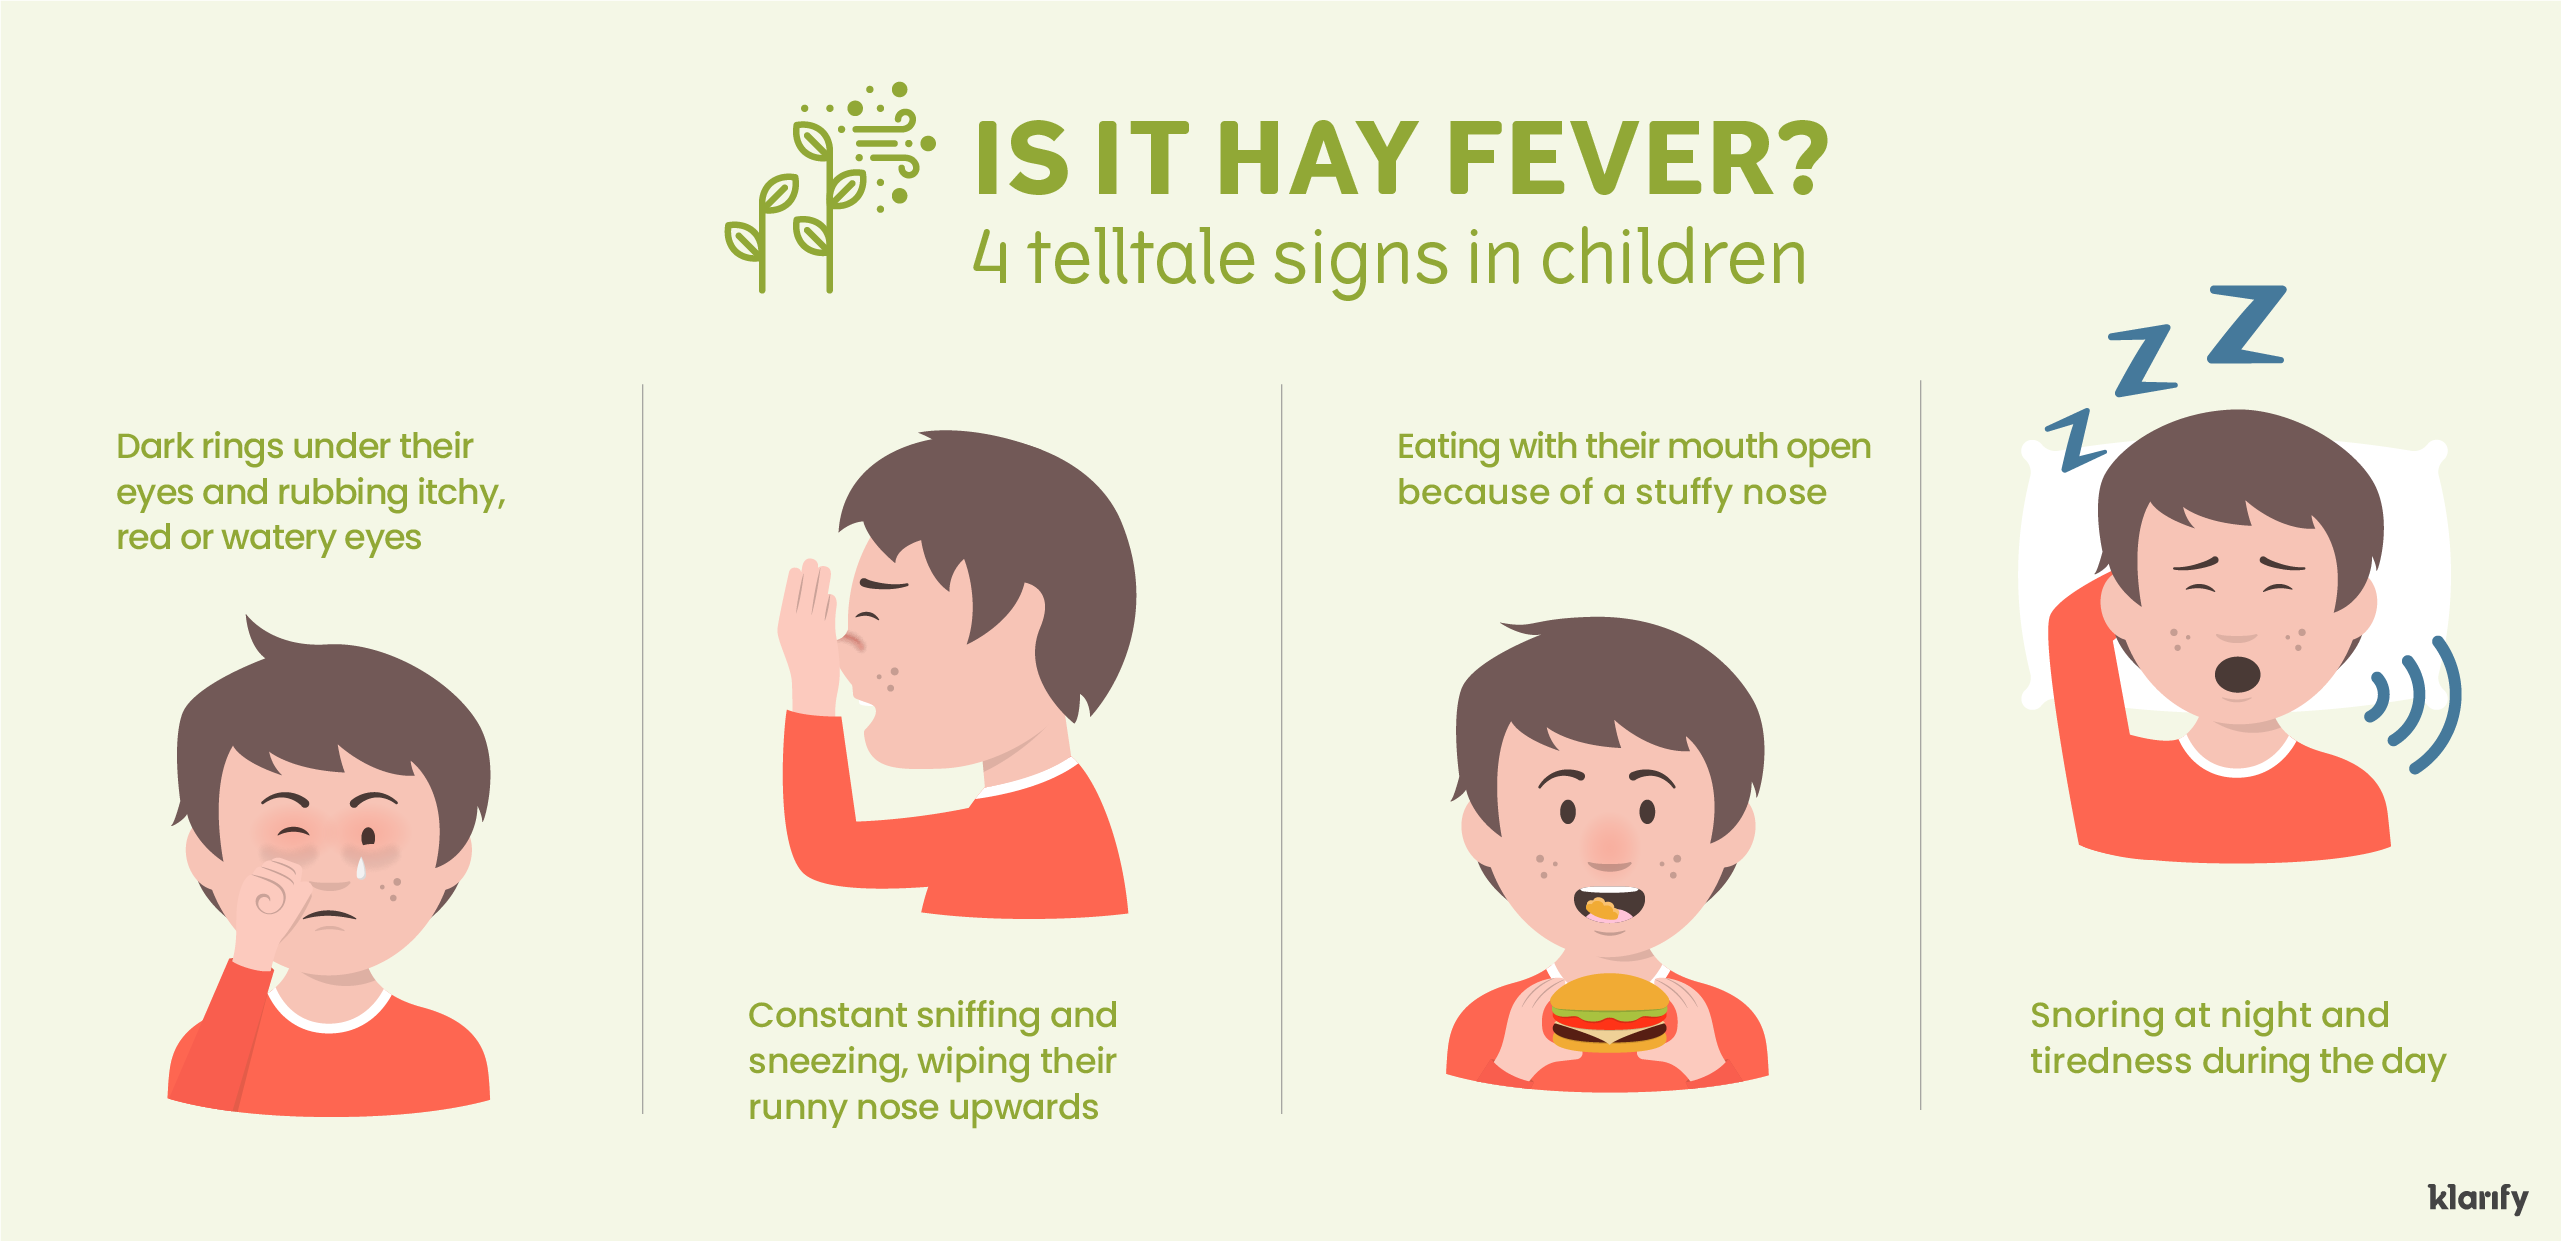  Infographic describing 4 telltale signs of hay fever in children. Details of the infographic listed below